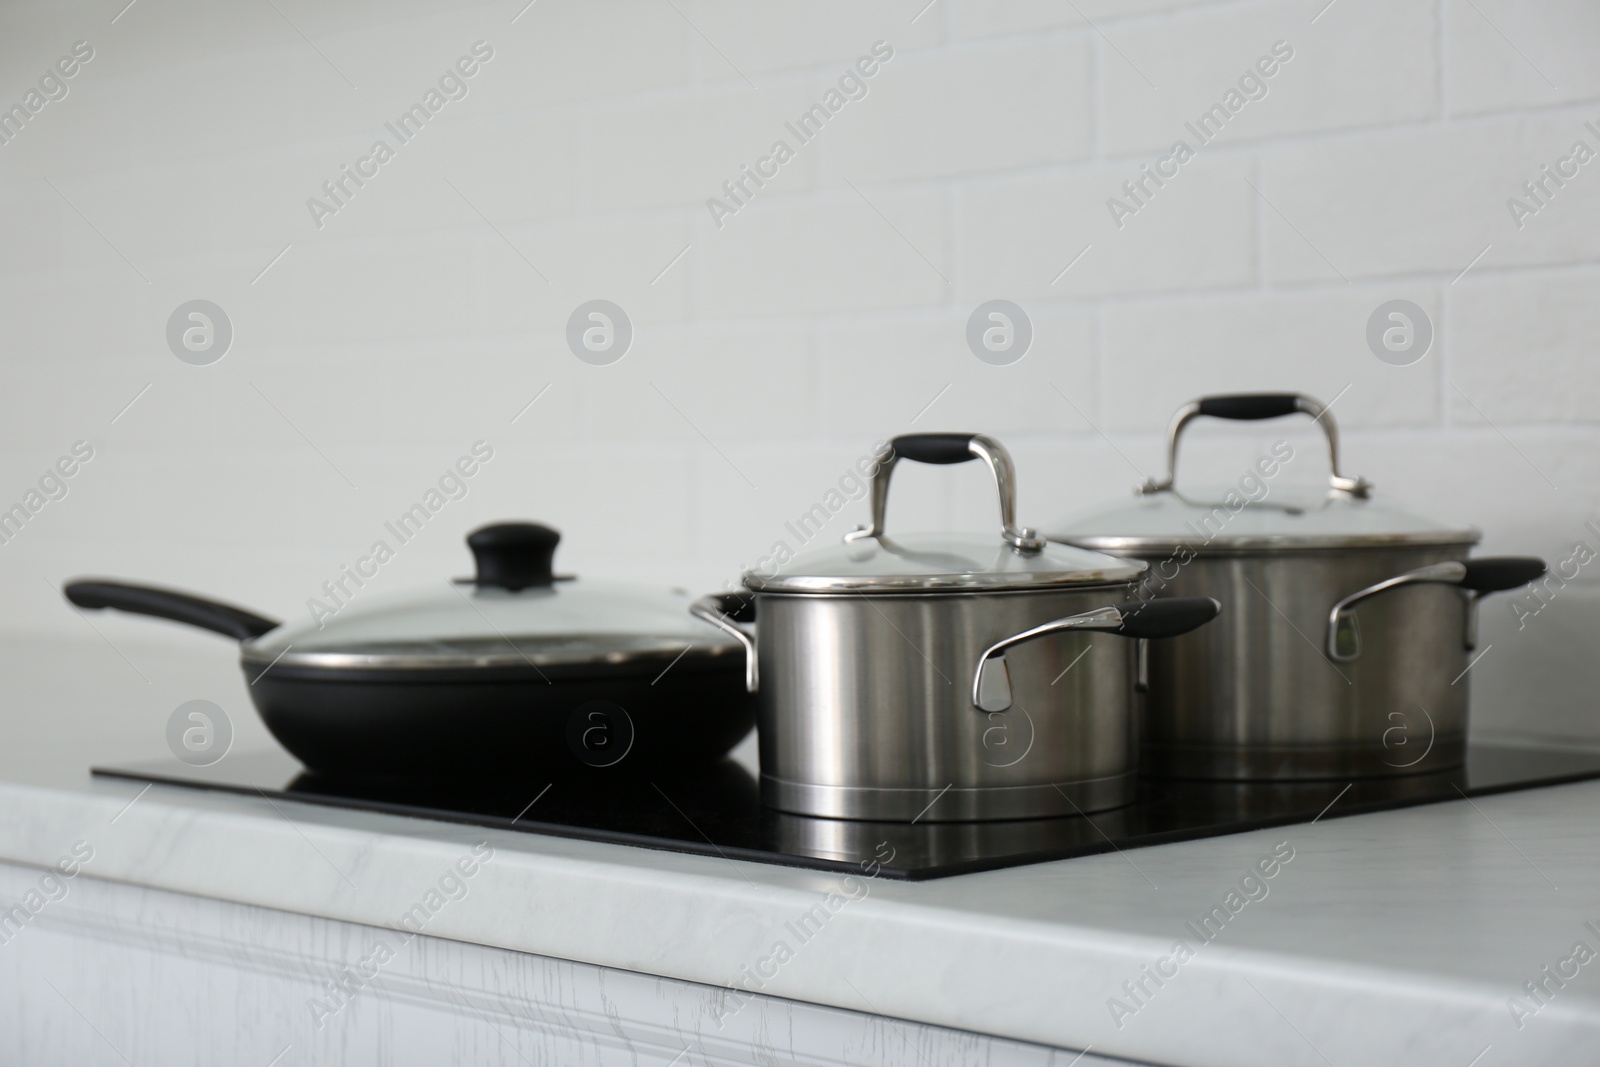 Photo of Saucepots and frying pan on induction stove in kitchen